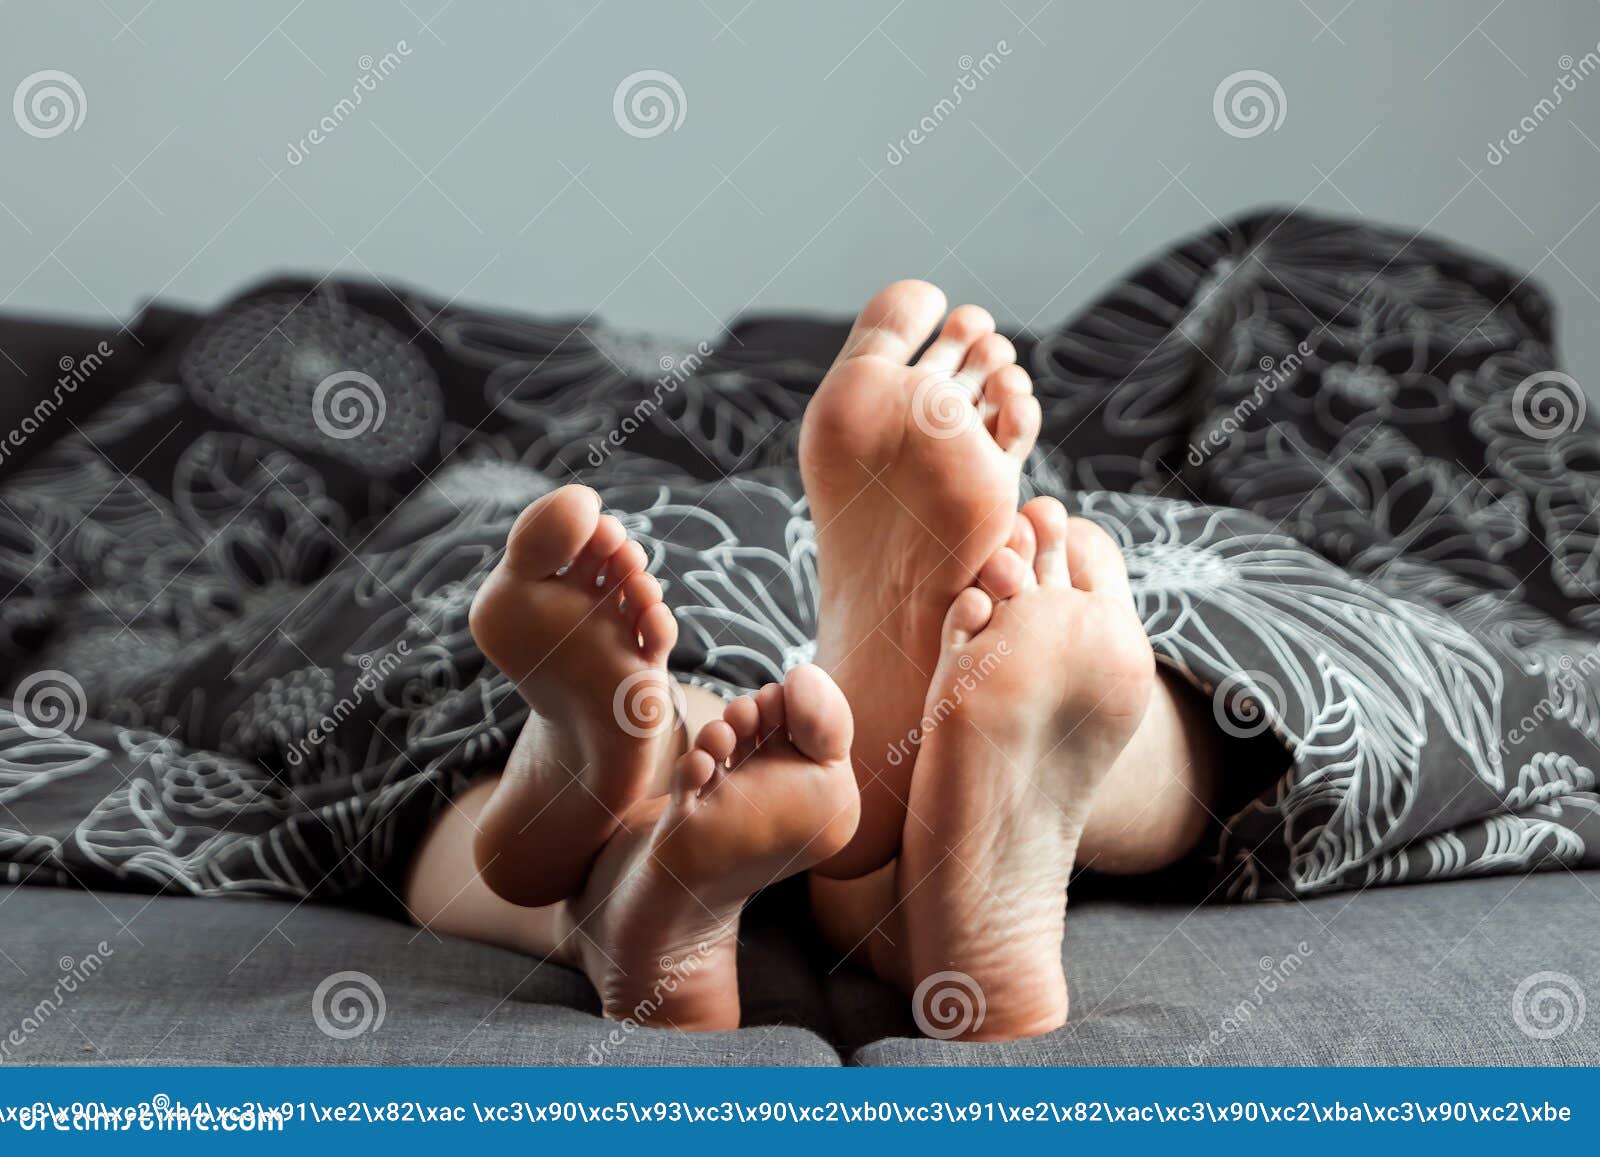 The Legs, Feet of a Couple in Love are Sticking Out from Under the Blanket picture image